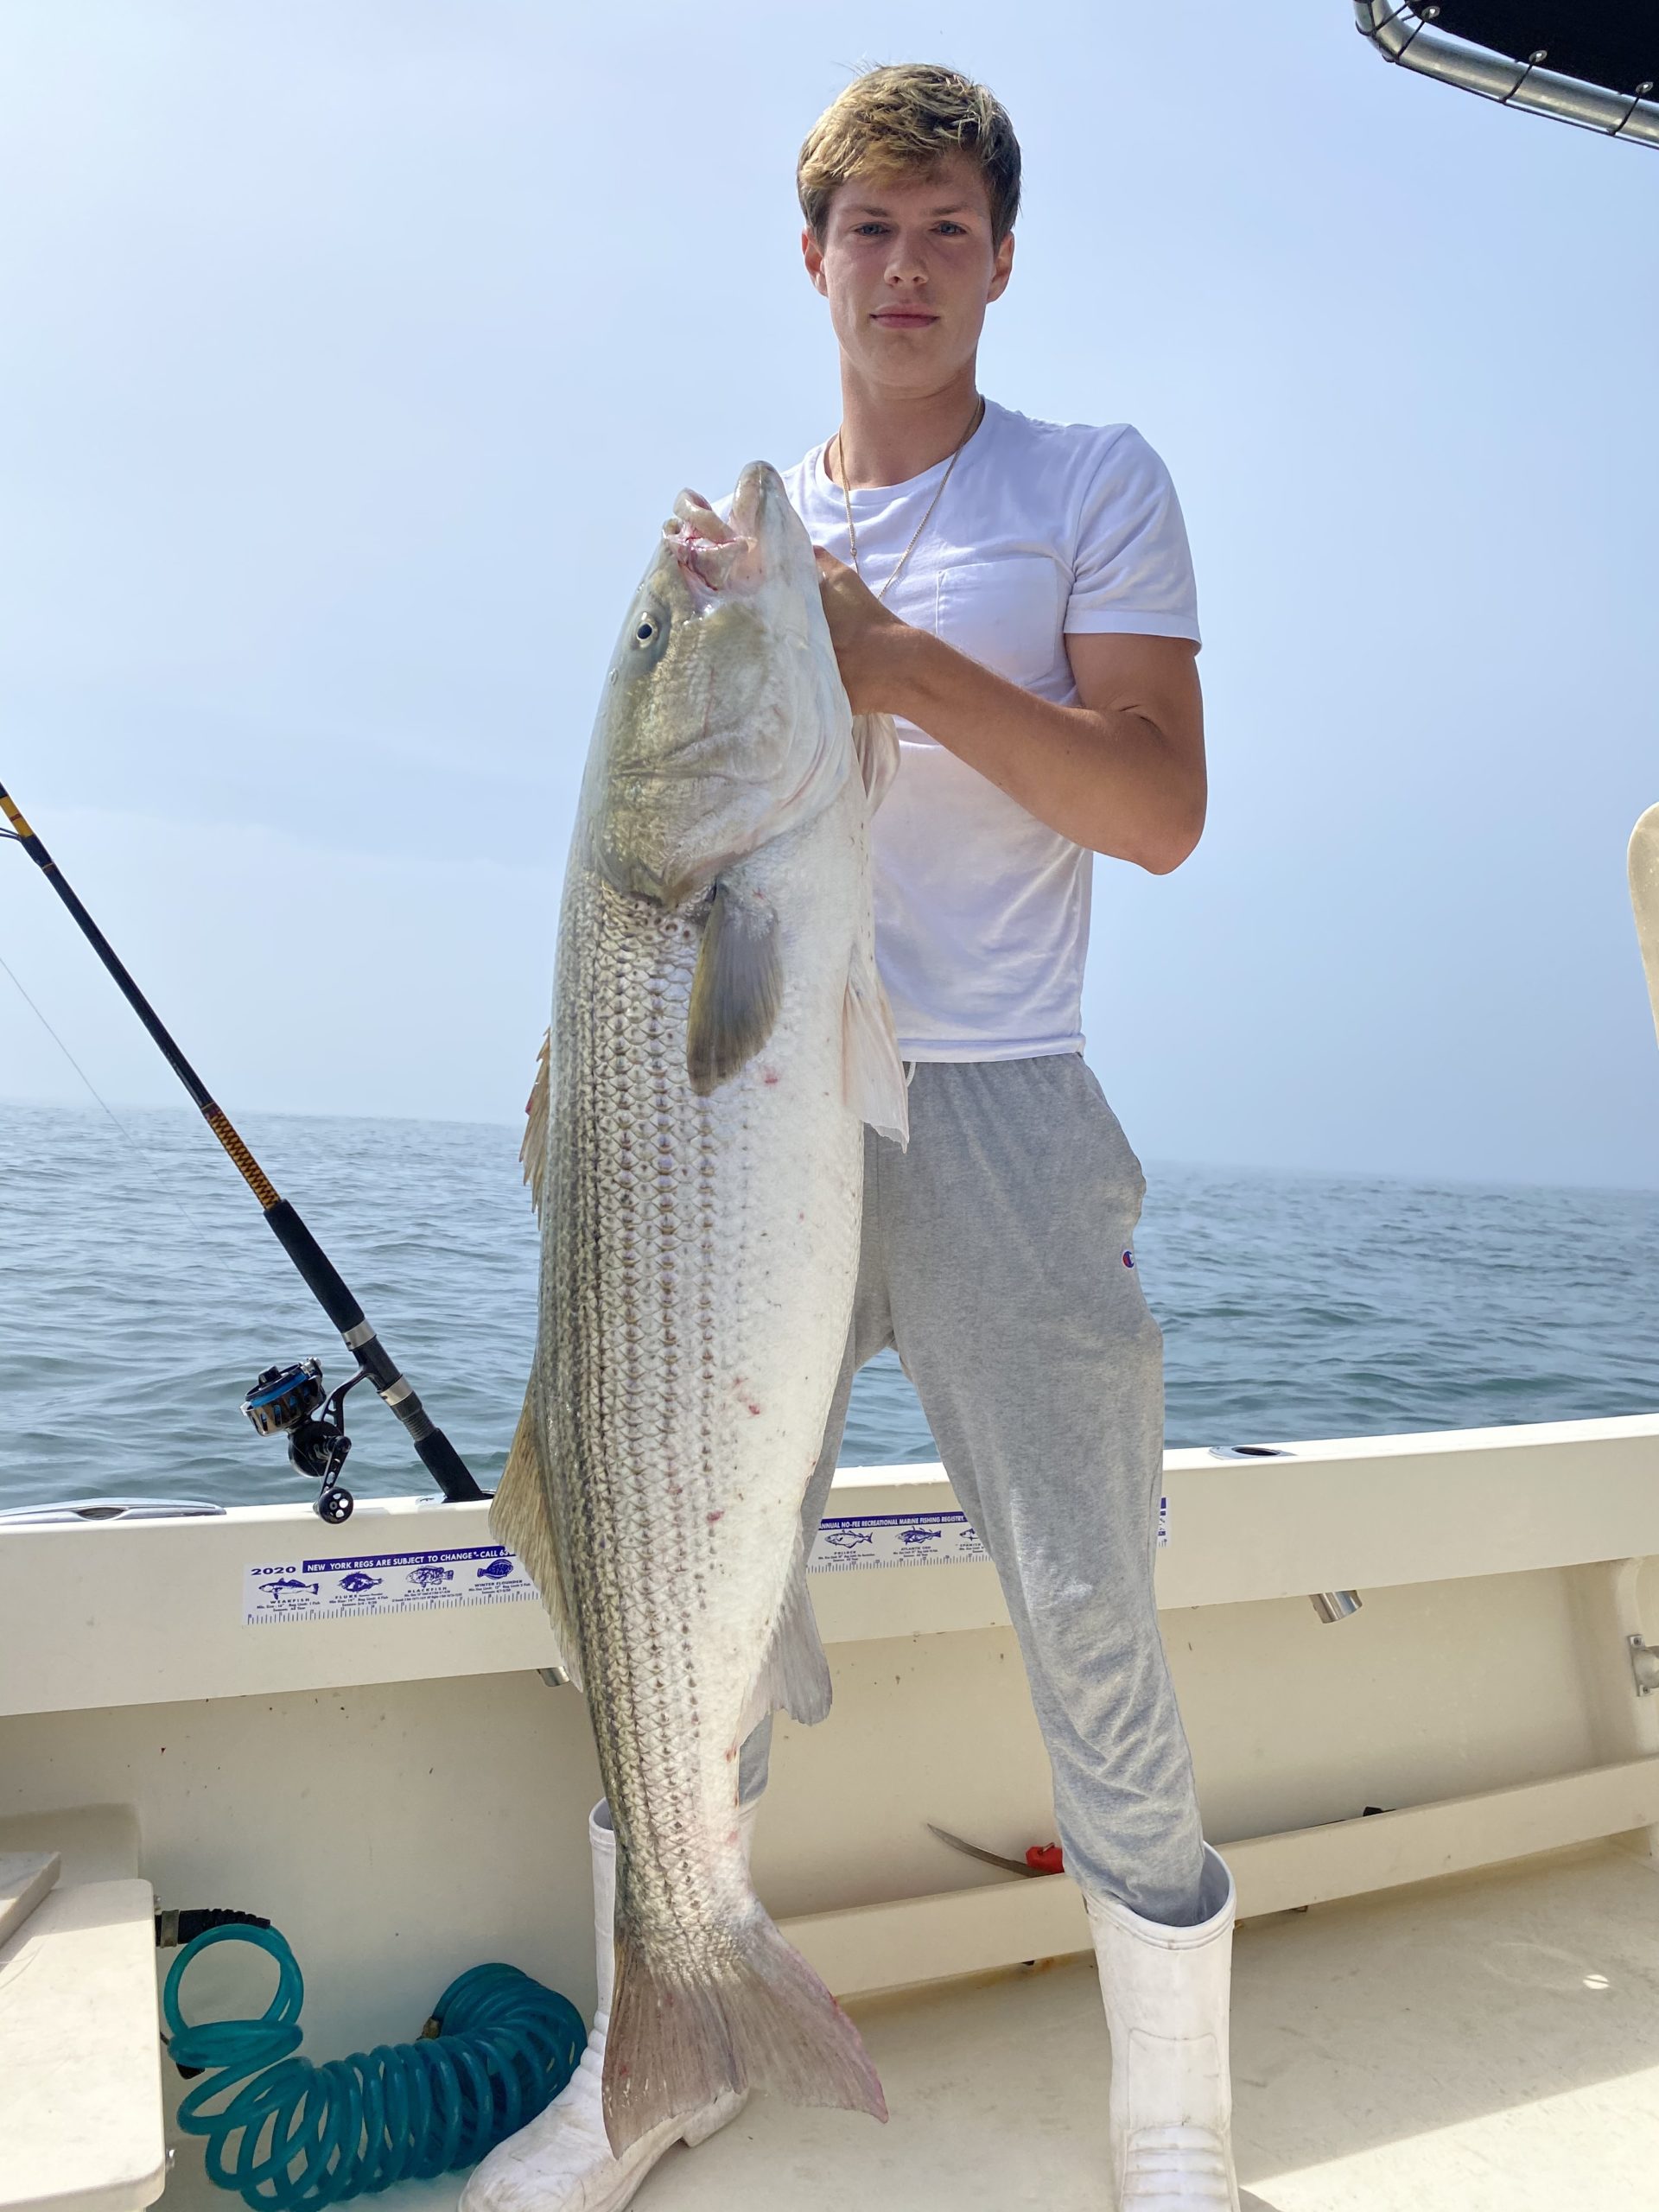 Big striped bass, like this 60 pounder decked by Witt Holmes while fishing off Montauk with Capt. Savio MIzzi of Fishooker Charters last month, are living to fight again another day this summer because of the new slot limit. 